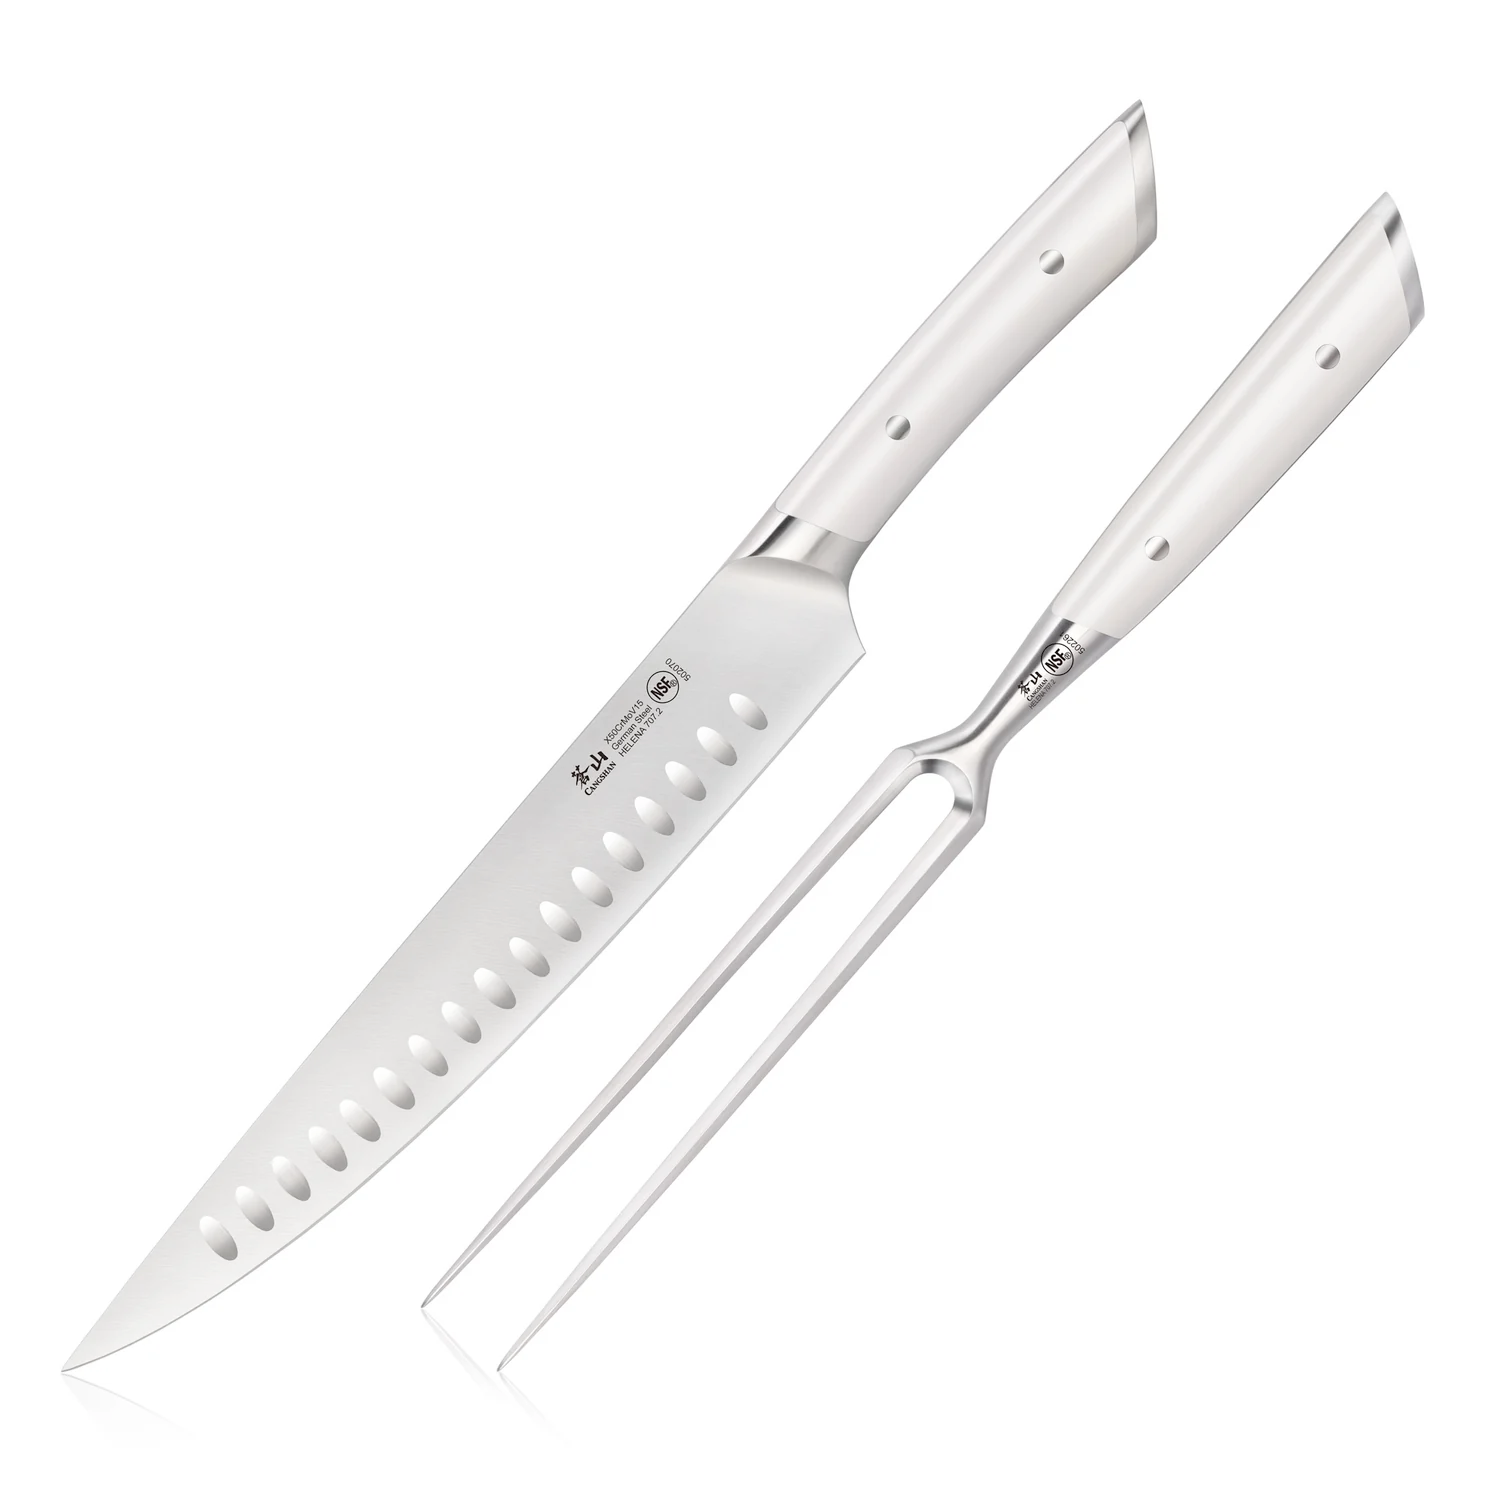 Cangshan HELENA Series German Steel Forged 2-Piece Carving Set, White